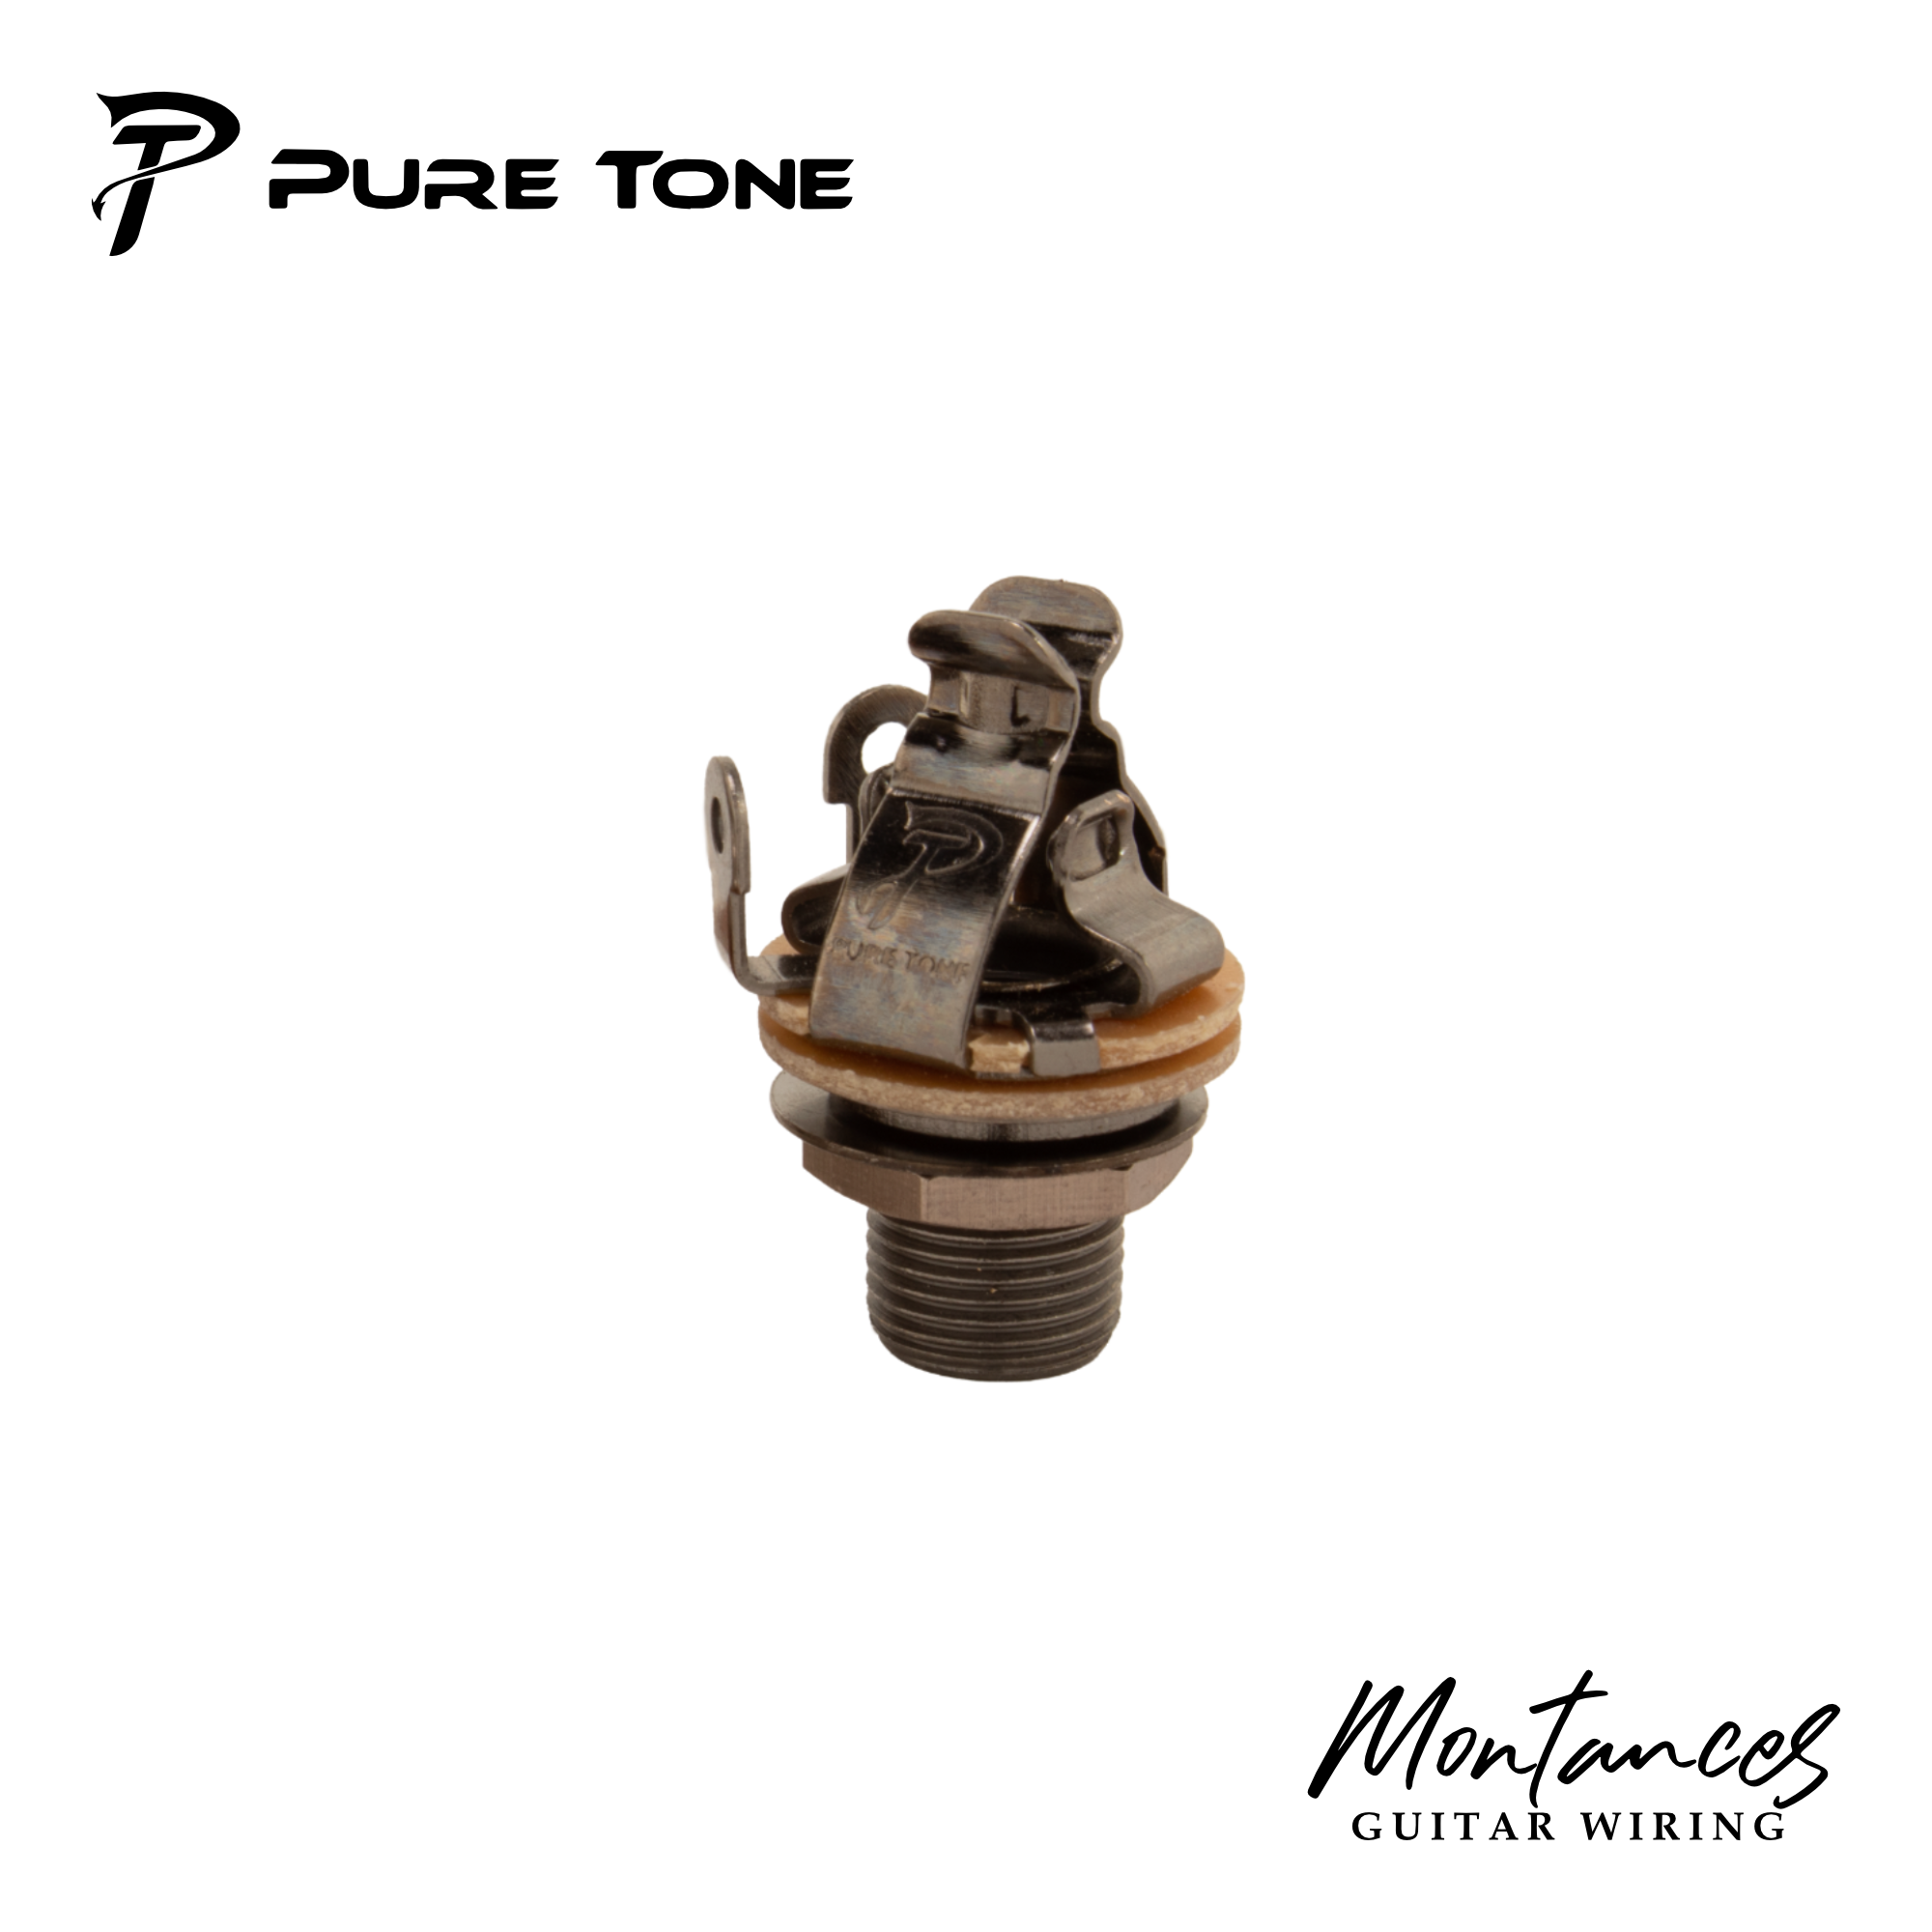 Pure Tone® Multi-Contact Output Jack Made in USA